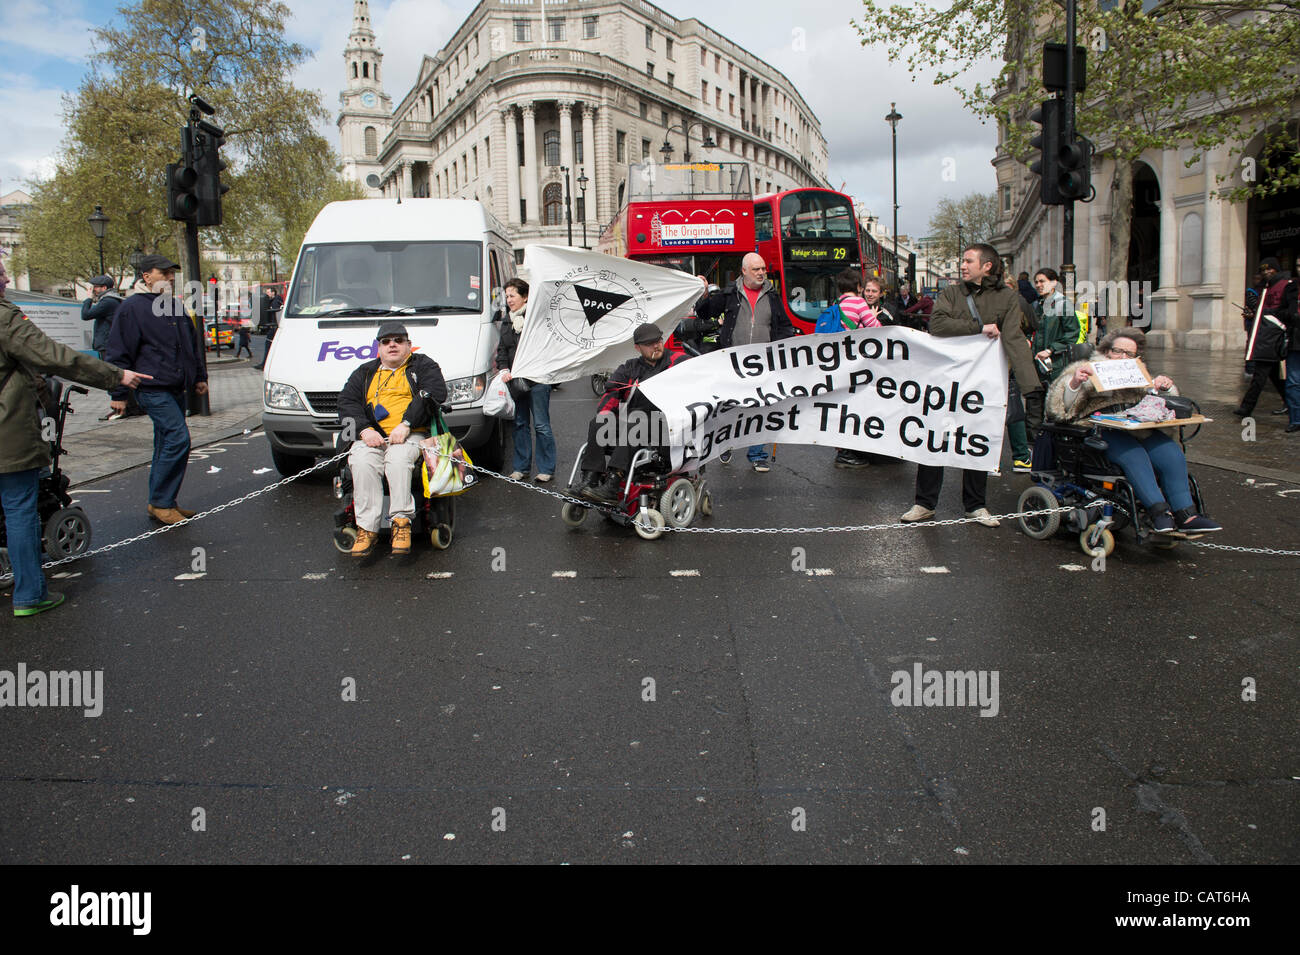 18th April 2012, Trafalgar Square,London. Disabled people block the road causing massive congestion along the Strand and other roads in protest to cuts affecting disabled residents of Islington. Stock Photo